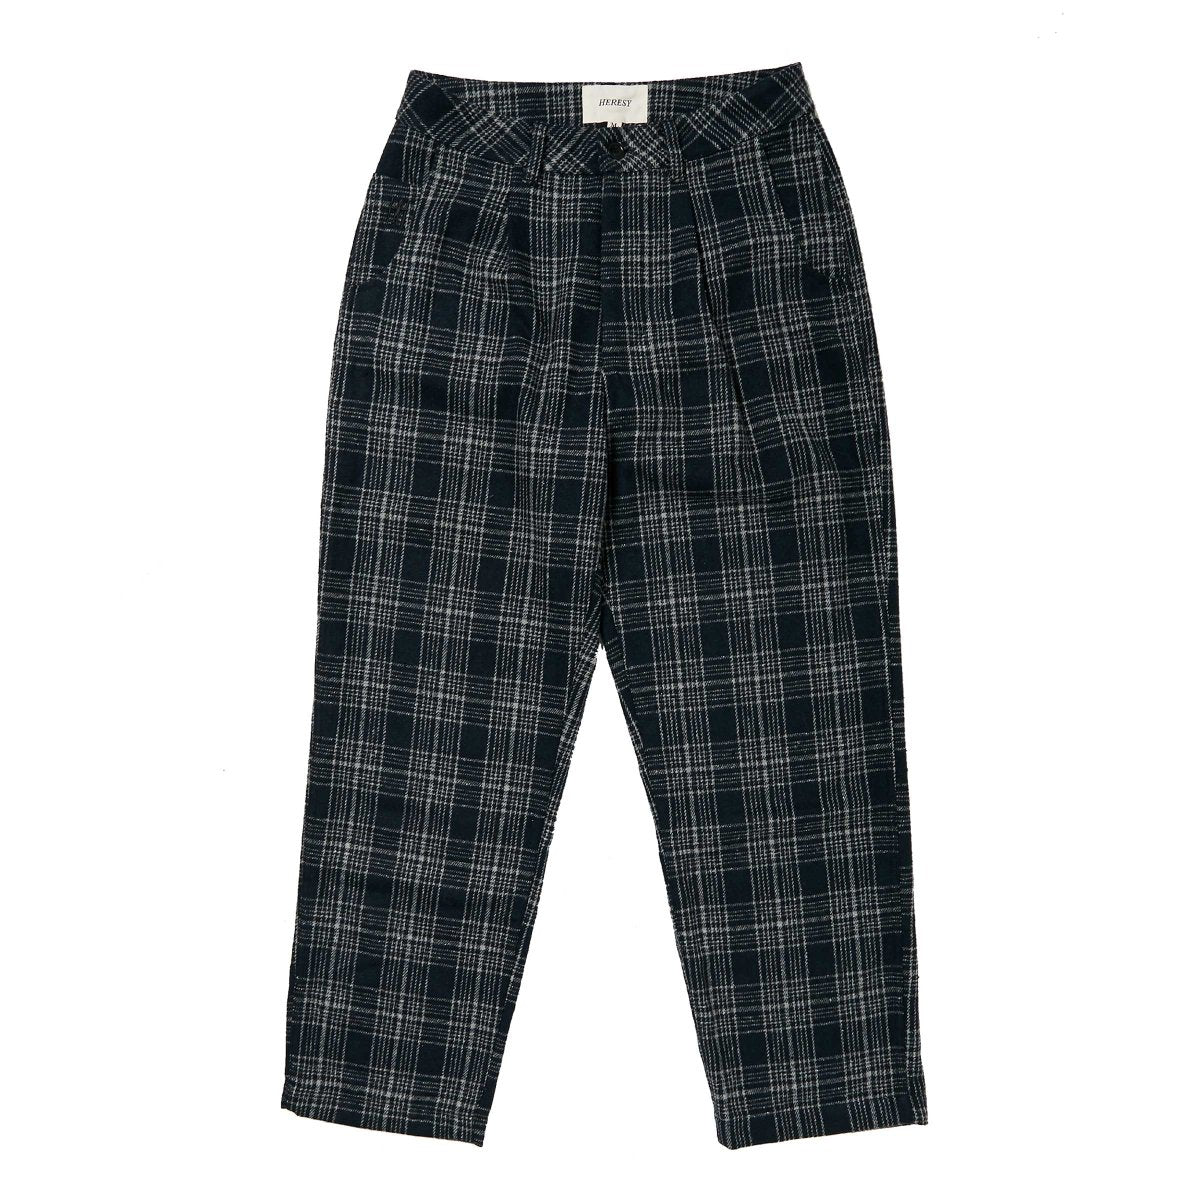 Heresy Men's Preceptor Trousers Check – West NYC